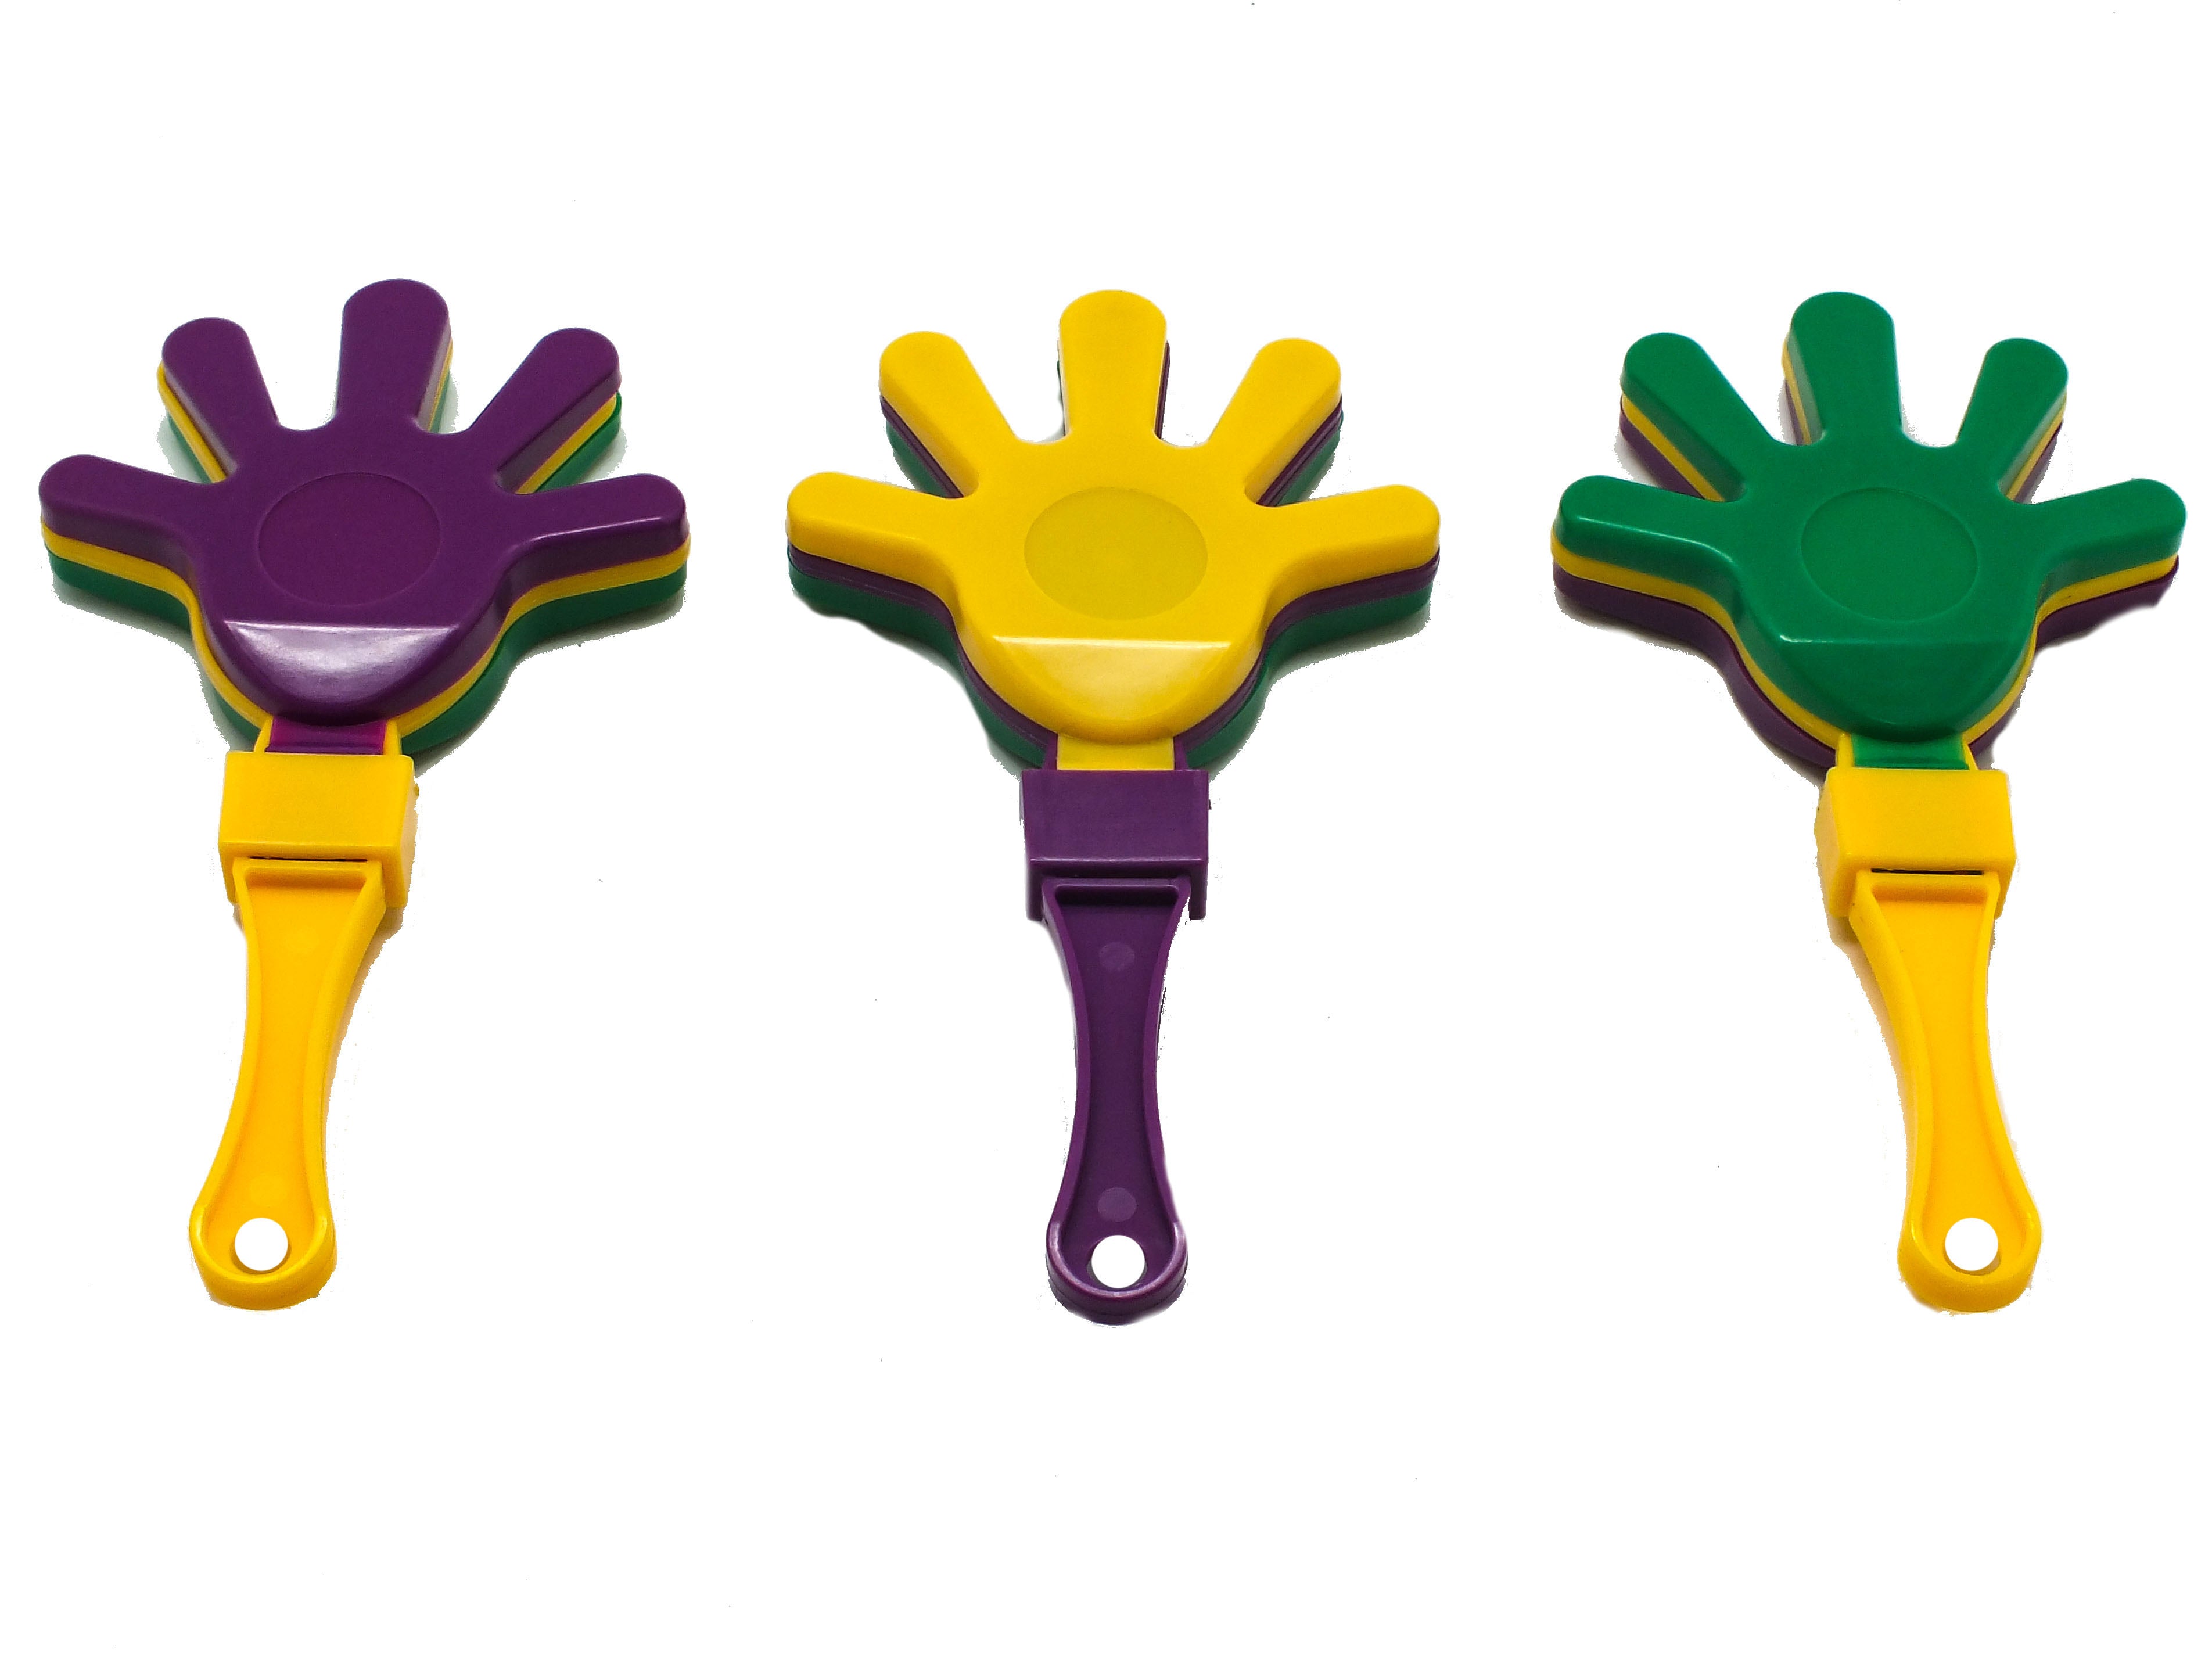 Purple, Green, and Gold Hand Clappers